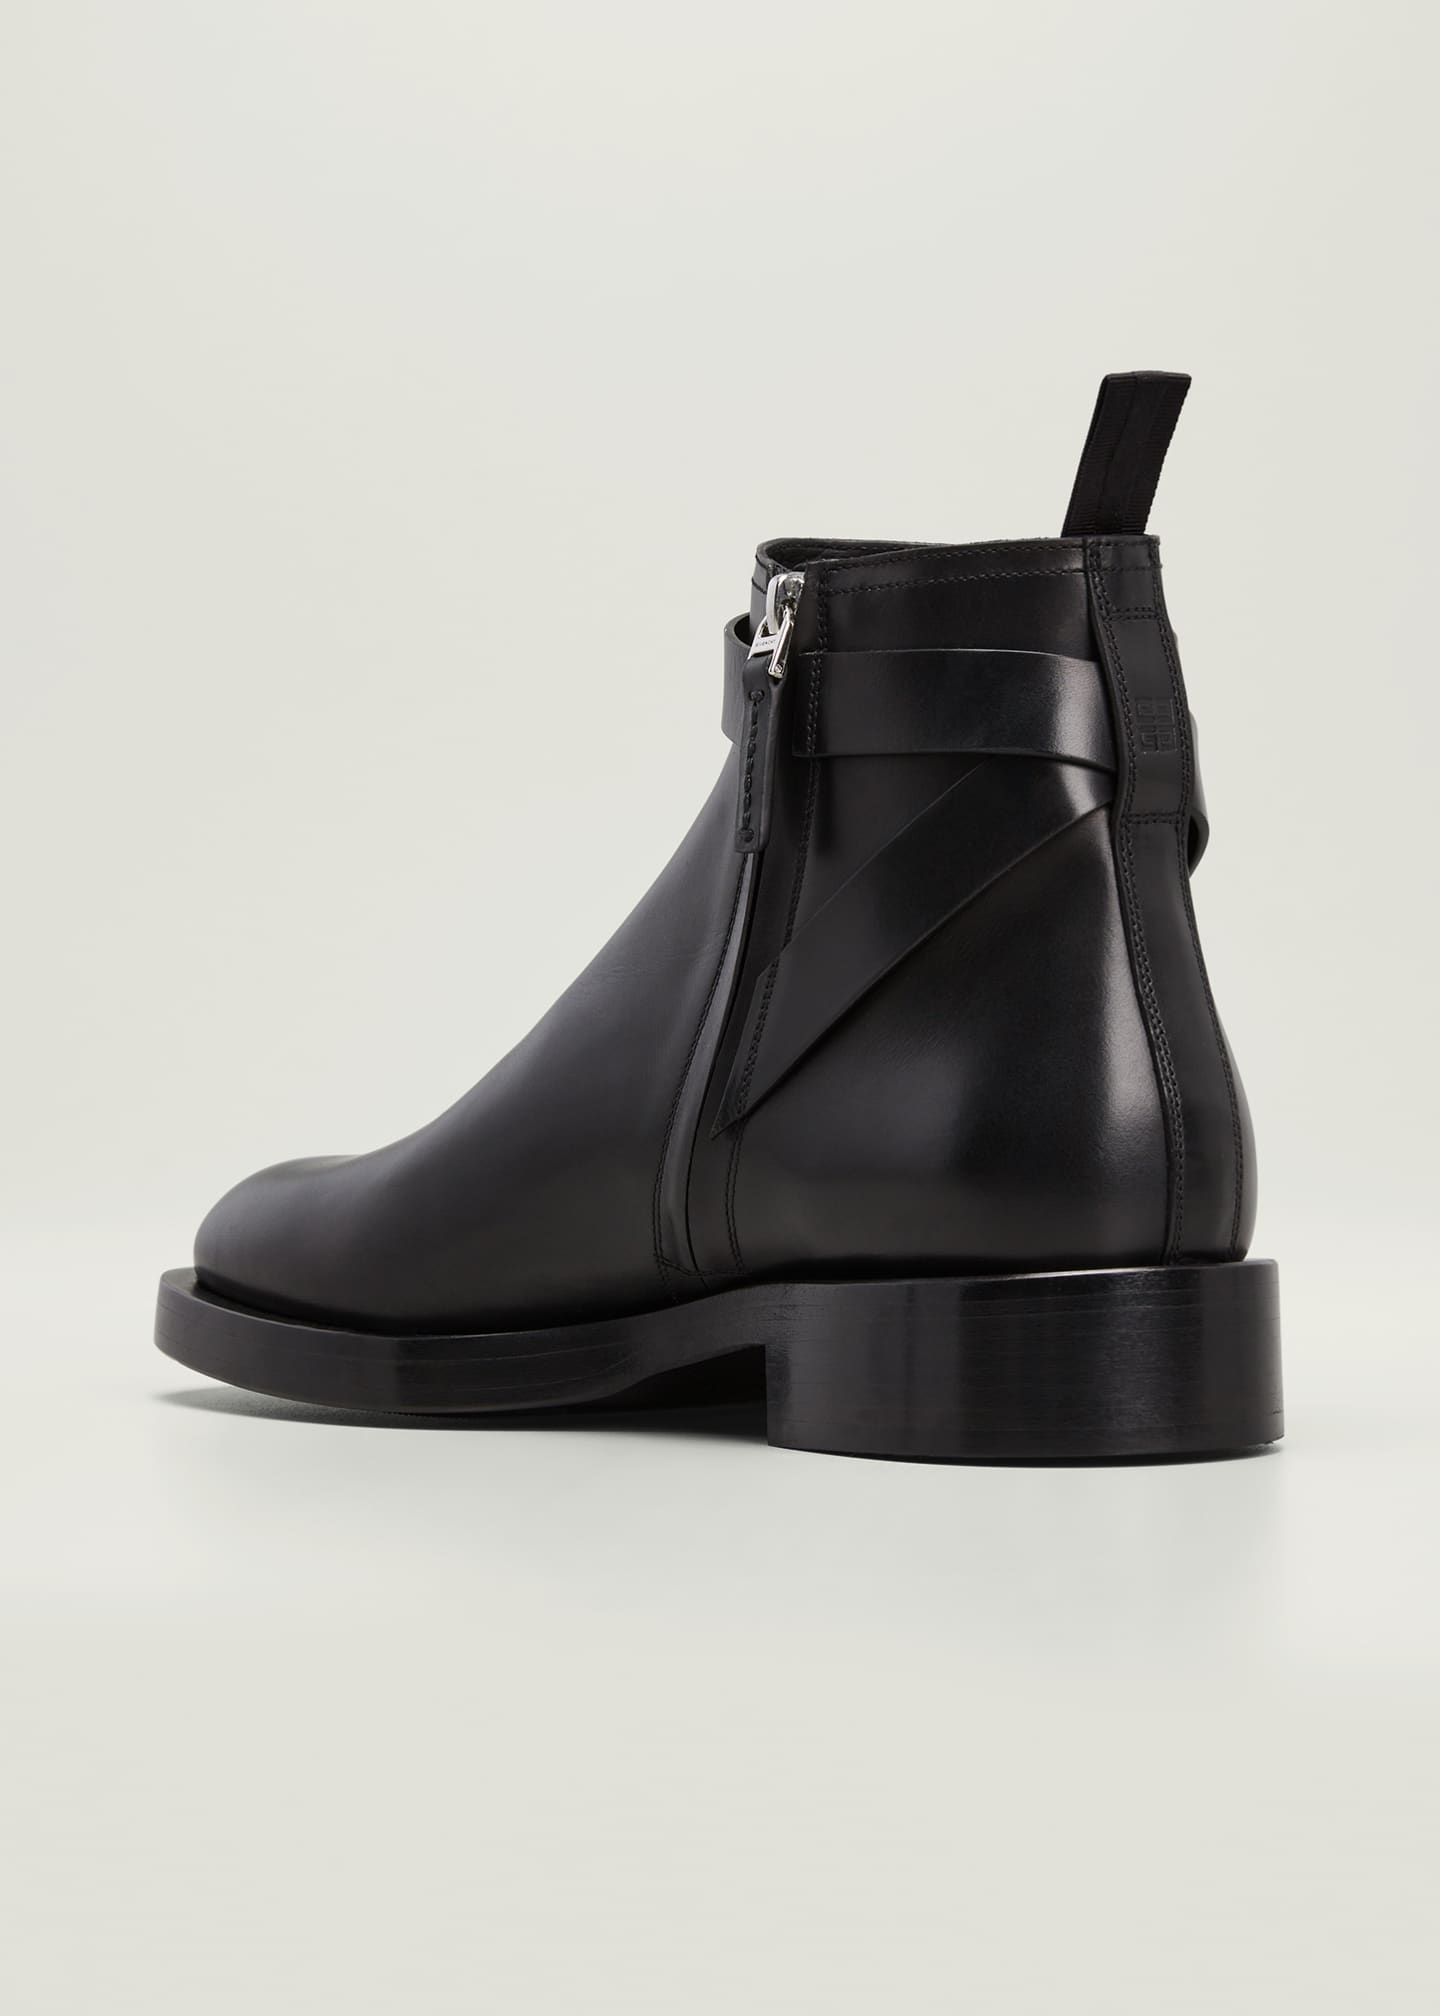 Givenchy Men's Lock Ankle Boots - Bergdorf Goodman